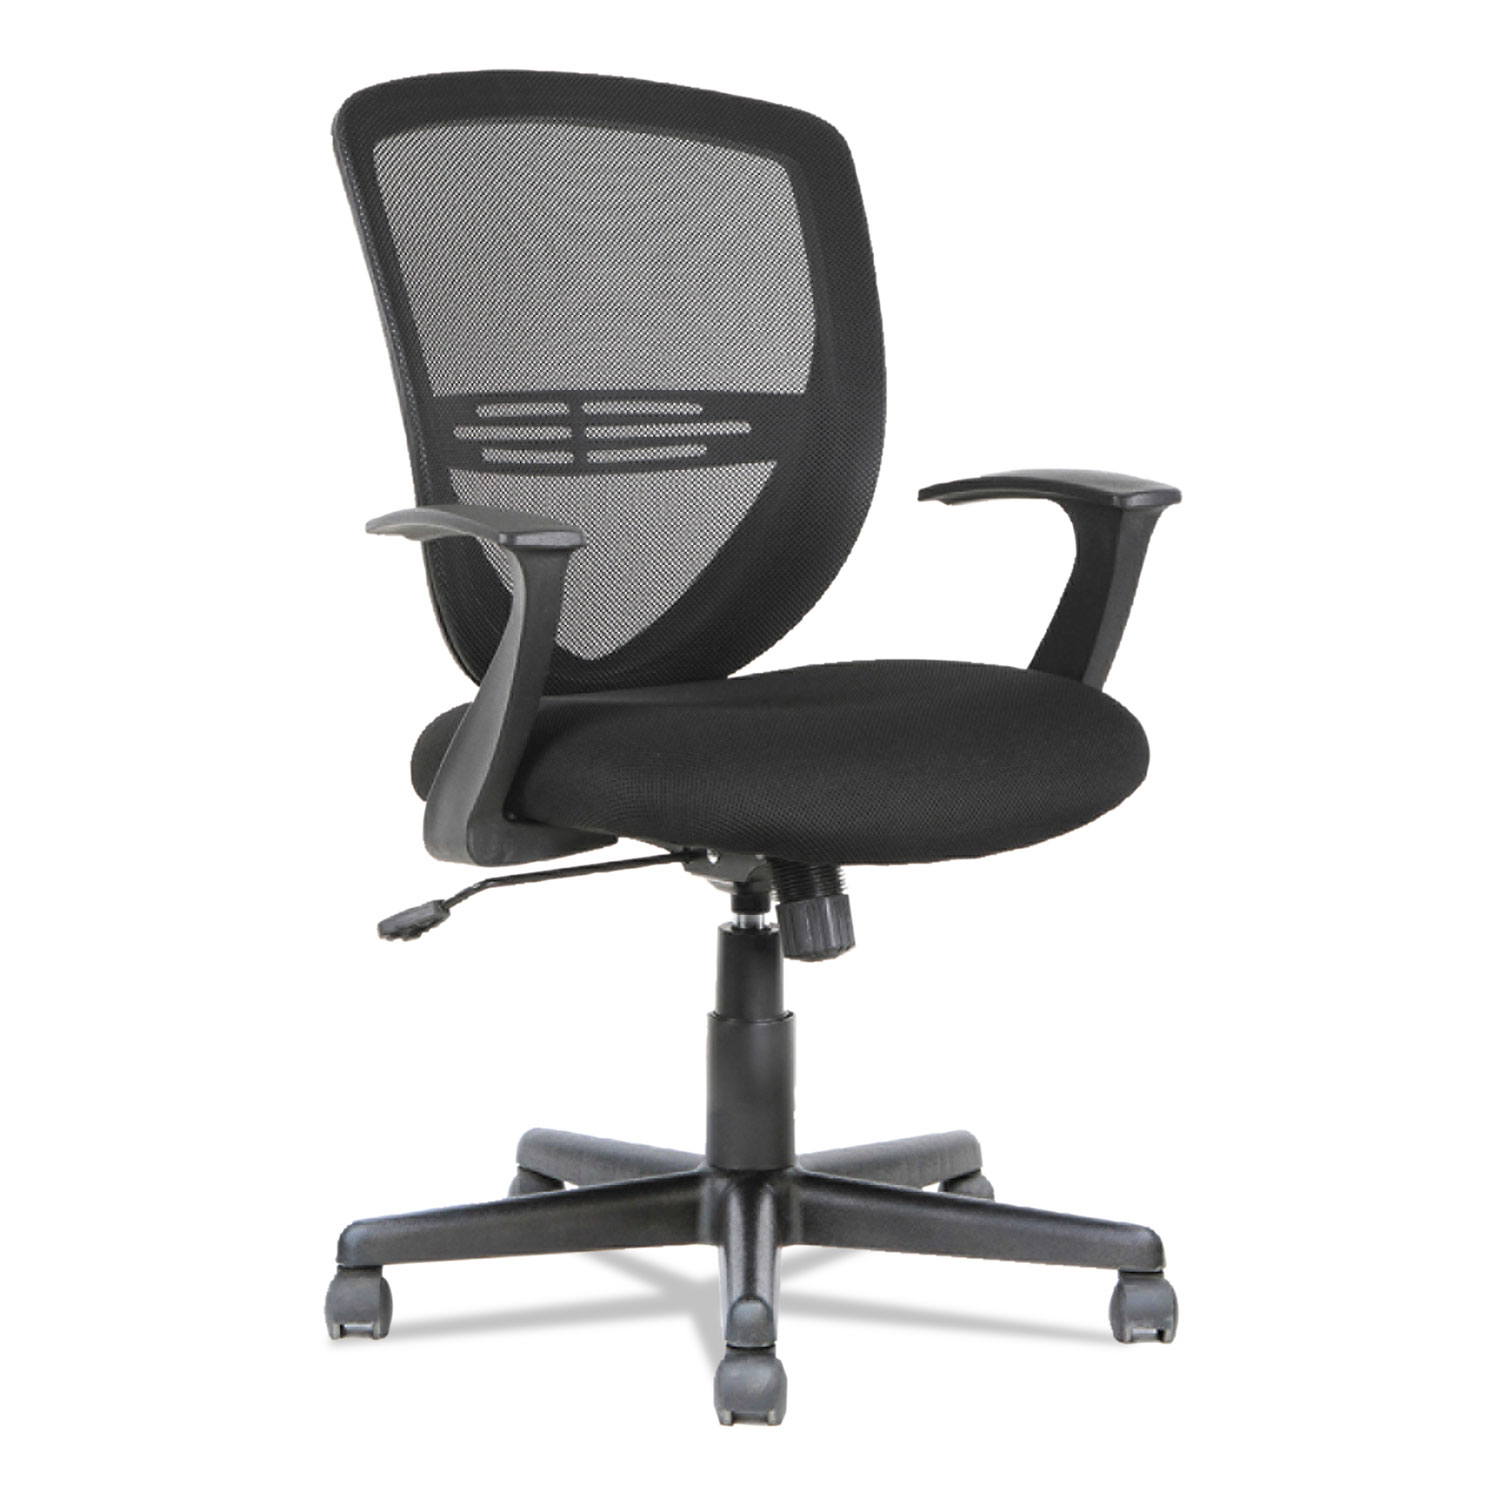  OIF OIFVS4717 Swivel/Tilt Mesh Mid-Back Task Chair, Supports up to 250 lbs., Black Seat/Black Back, Black Base (OIFVS4717) 